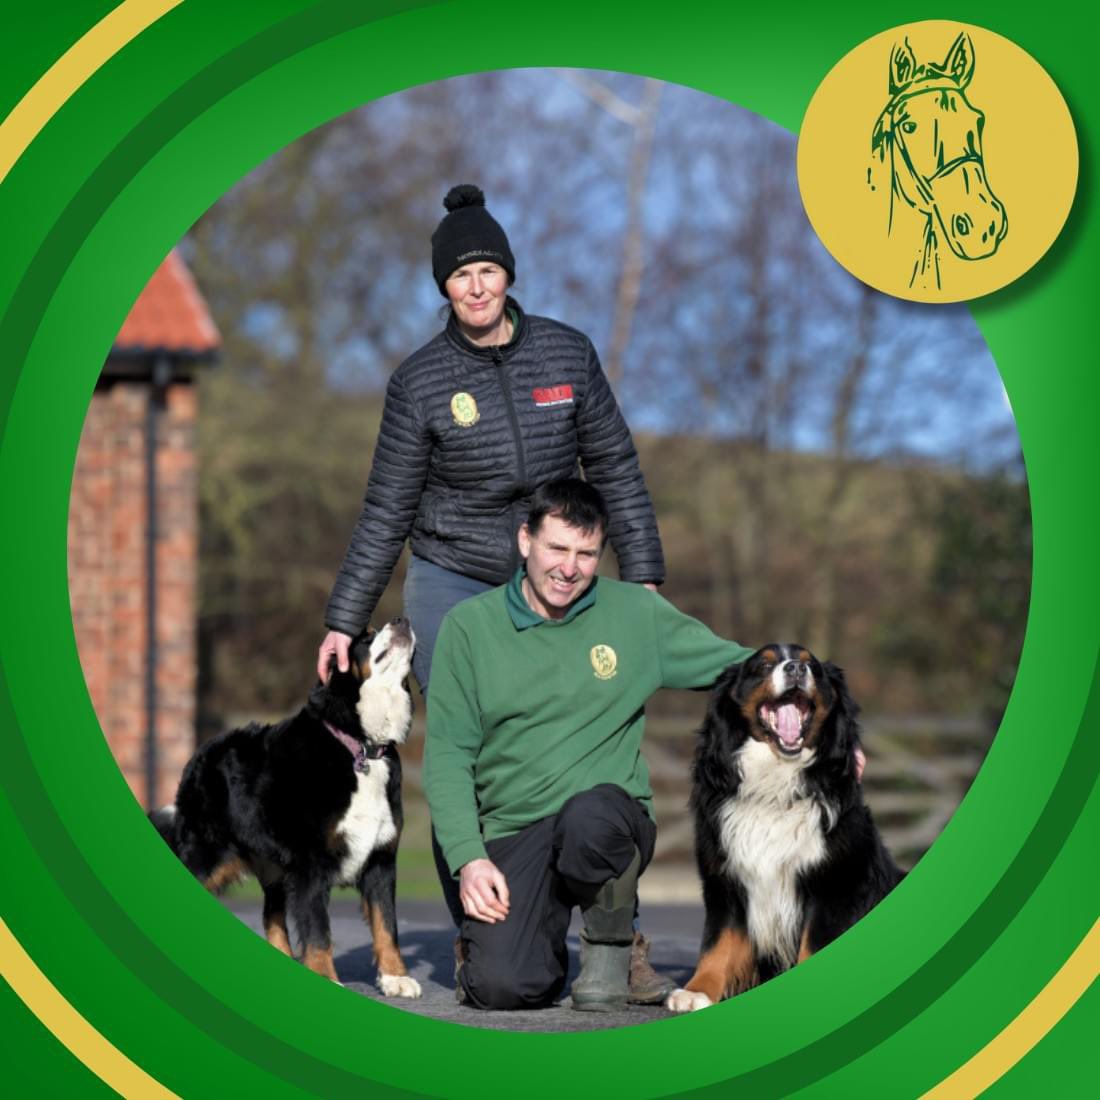 Meet our exceptional management team at Elwick Stud, led by Garry Moore and his wife Louisa. Don't forget to say hello to their beautiful Bernese Mountain dogs Heidi and Kholi who are always eager for a delicious treat! 🐶🐾 #ElwickStud #OneBigFamily